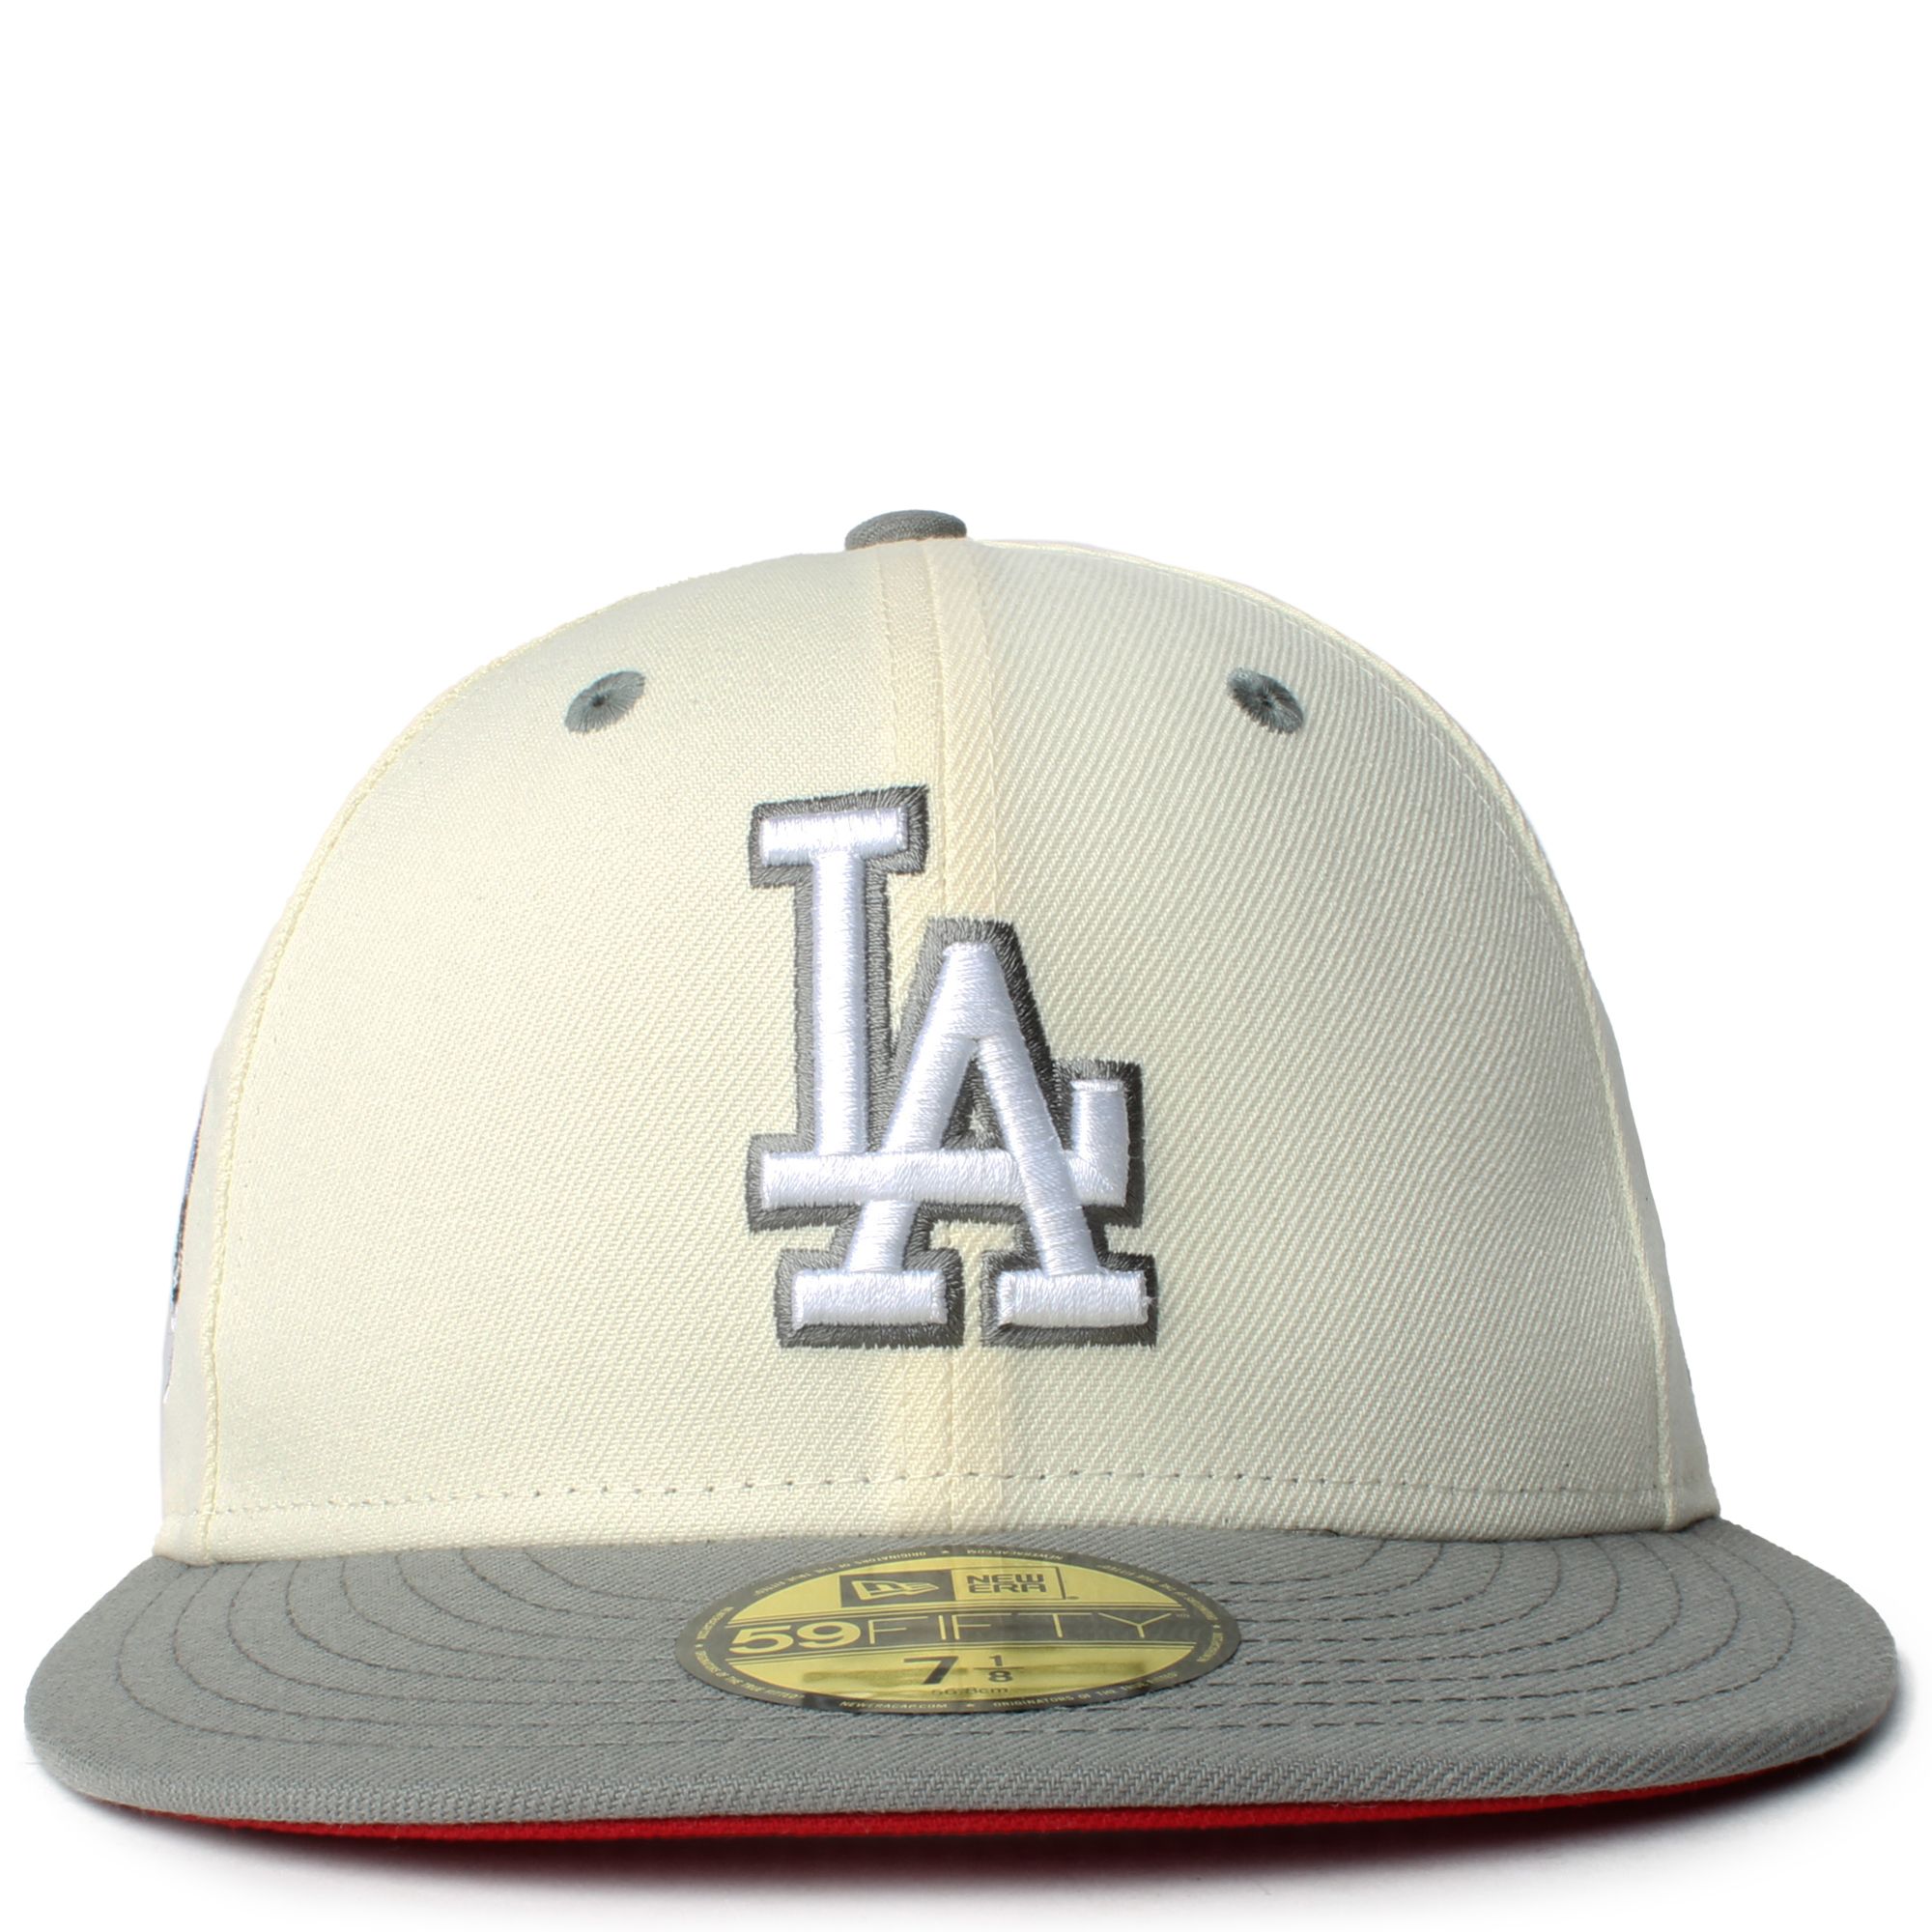 New Era Caps Los Angeles Dodgers Black Gray 59FIFTY Fitted Hat